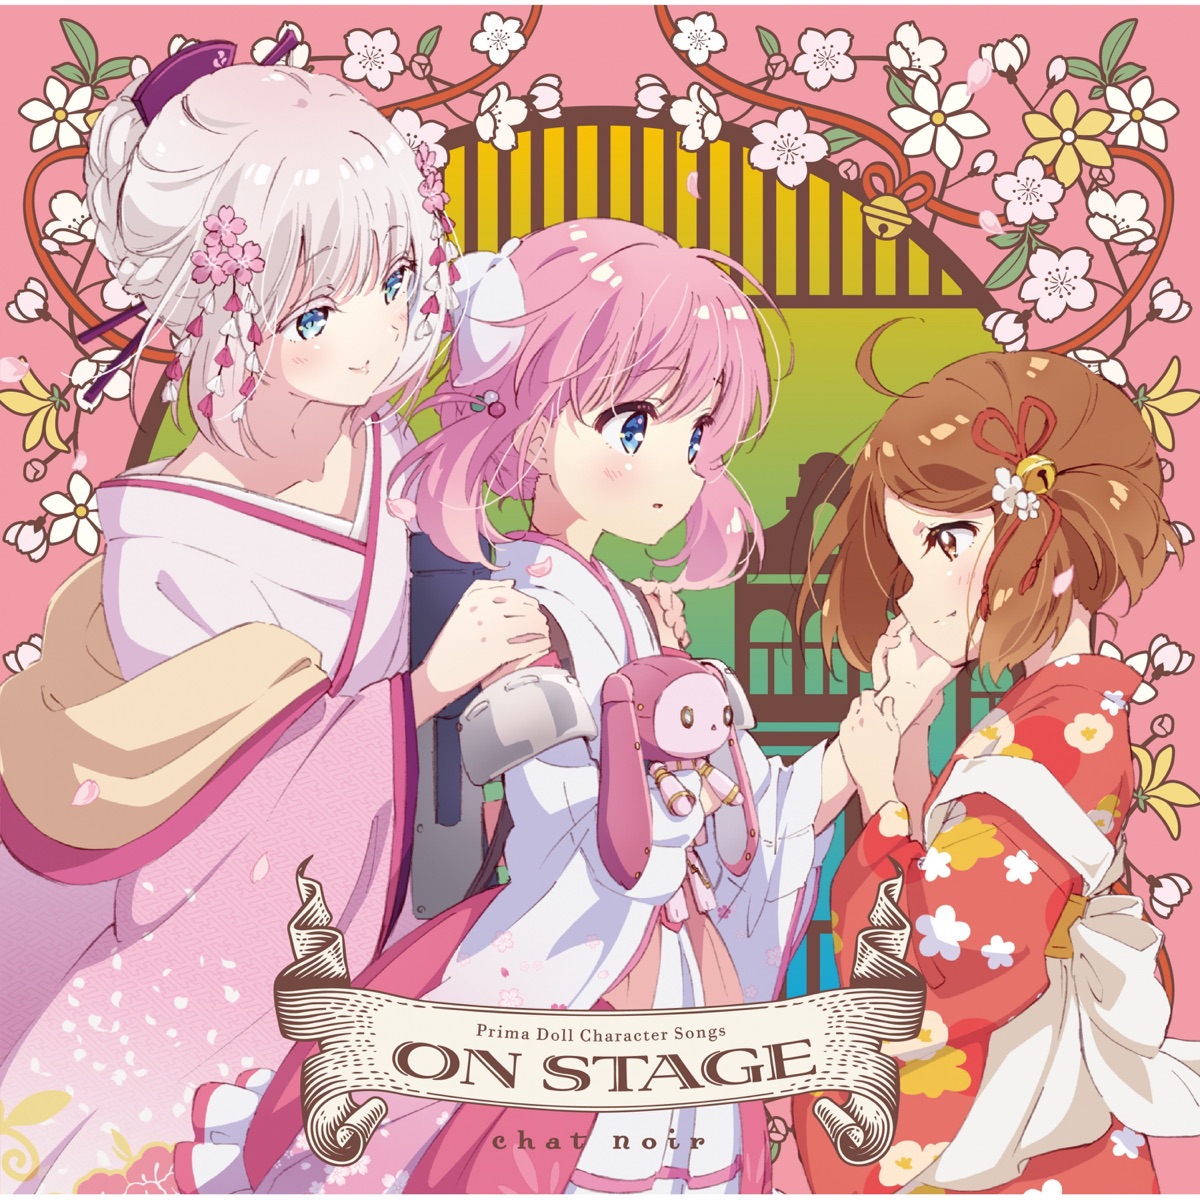 Cover art for『Gekka (Miyu Tomita) - Getsuraikou』from the release『ON STAGE』